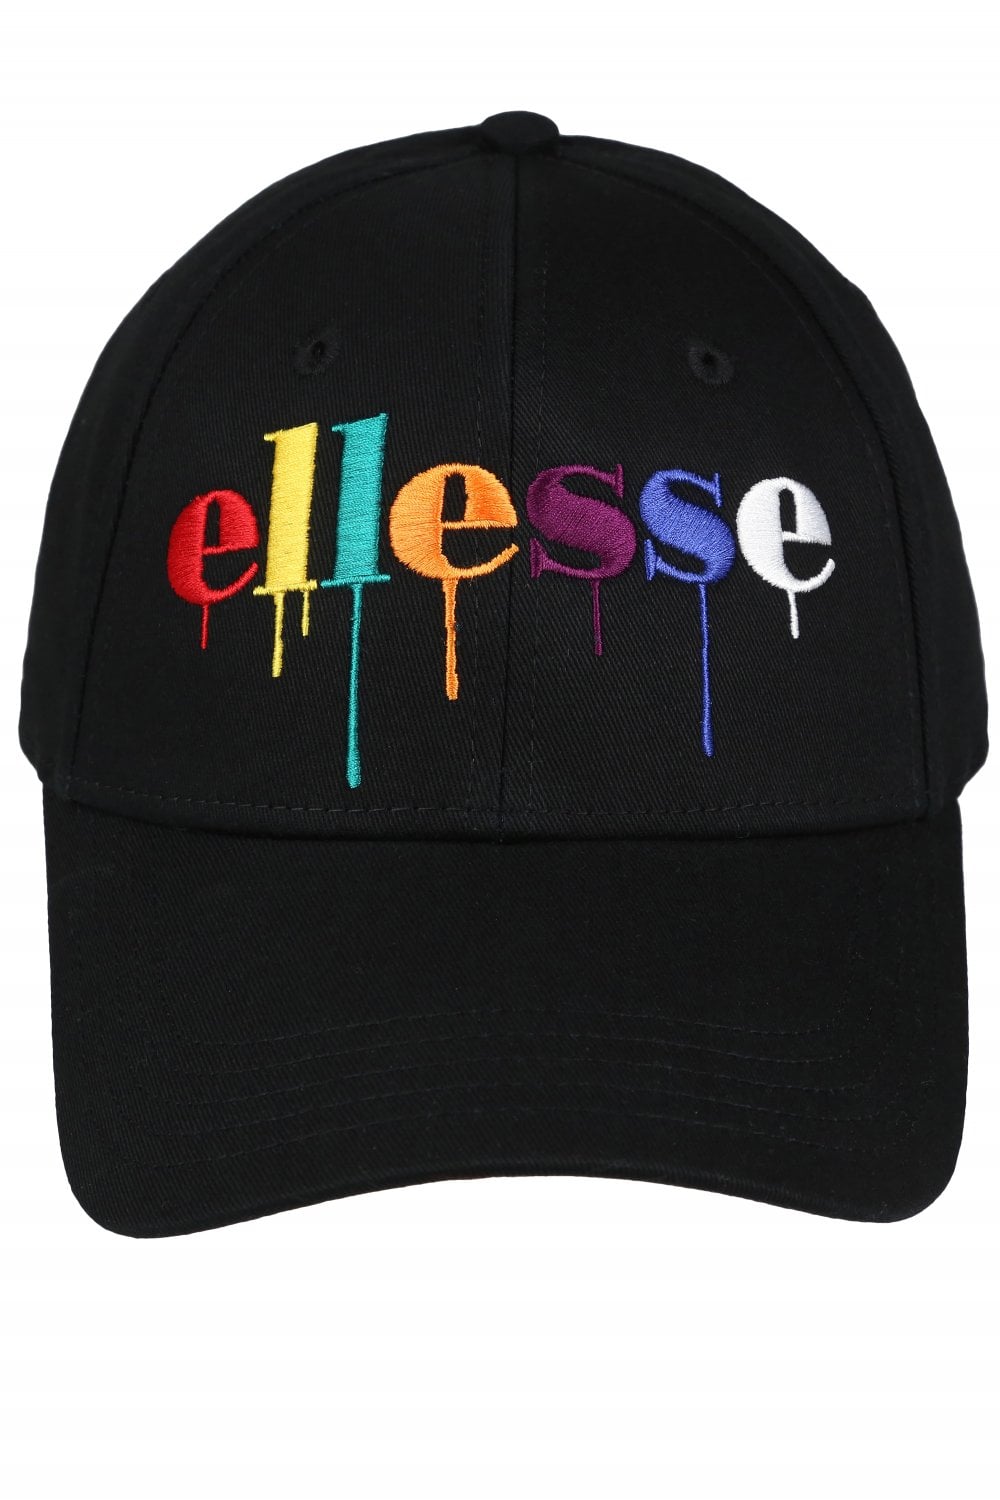 Caps and Clothing by Ellesse, Italian Brand